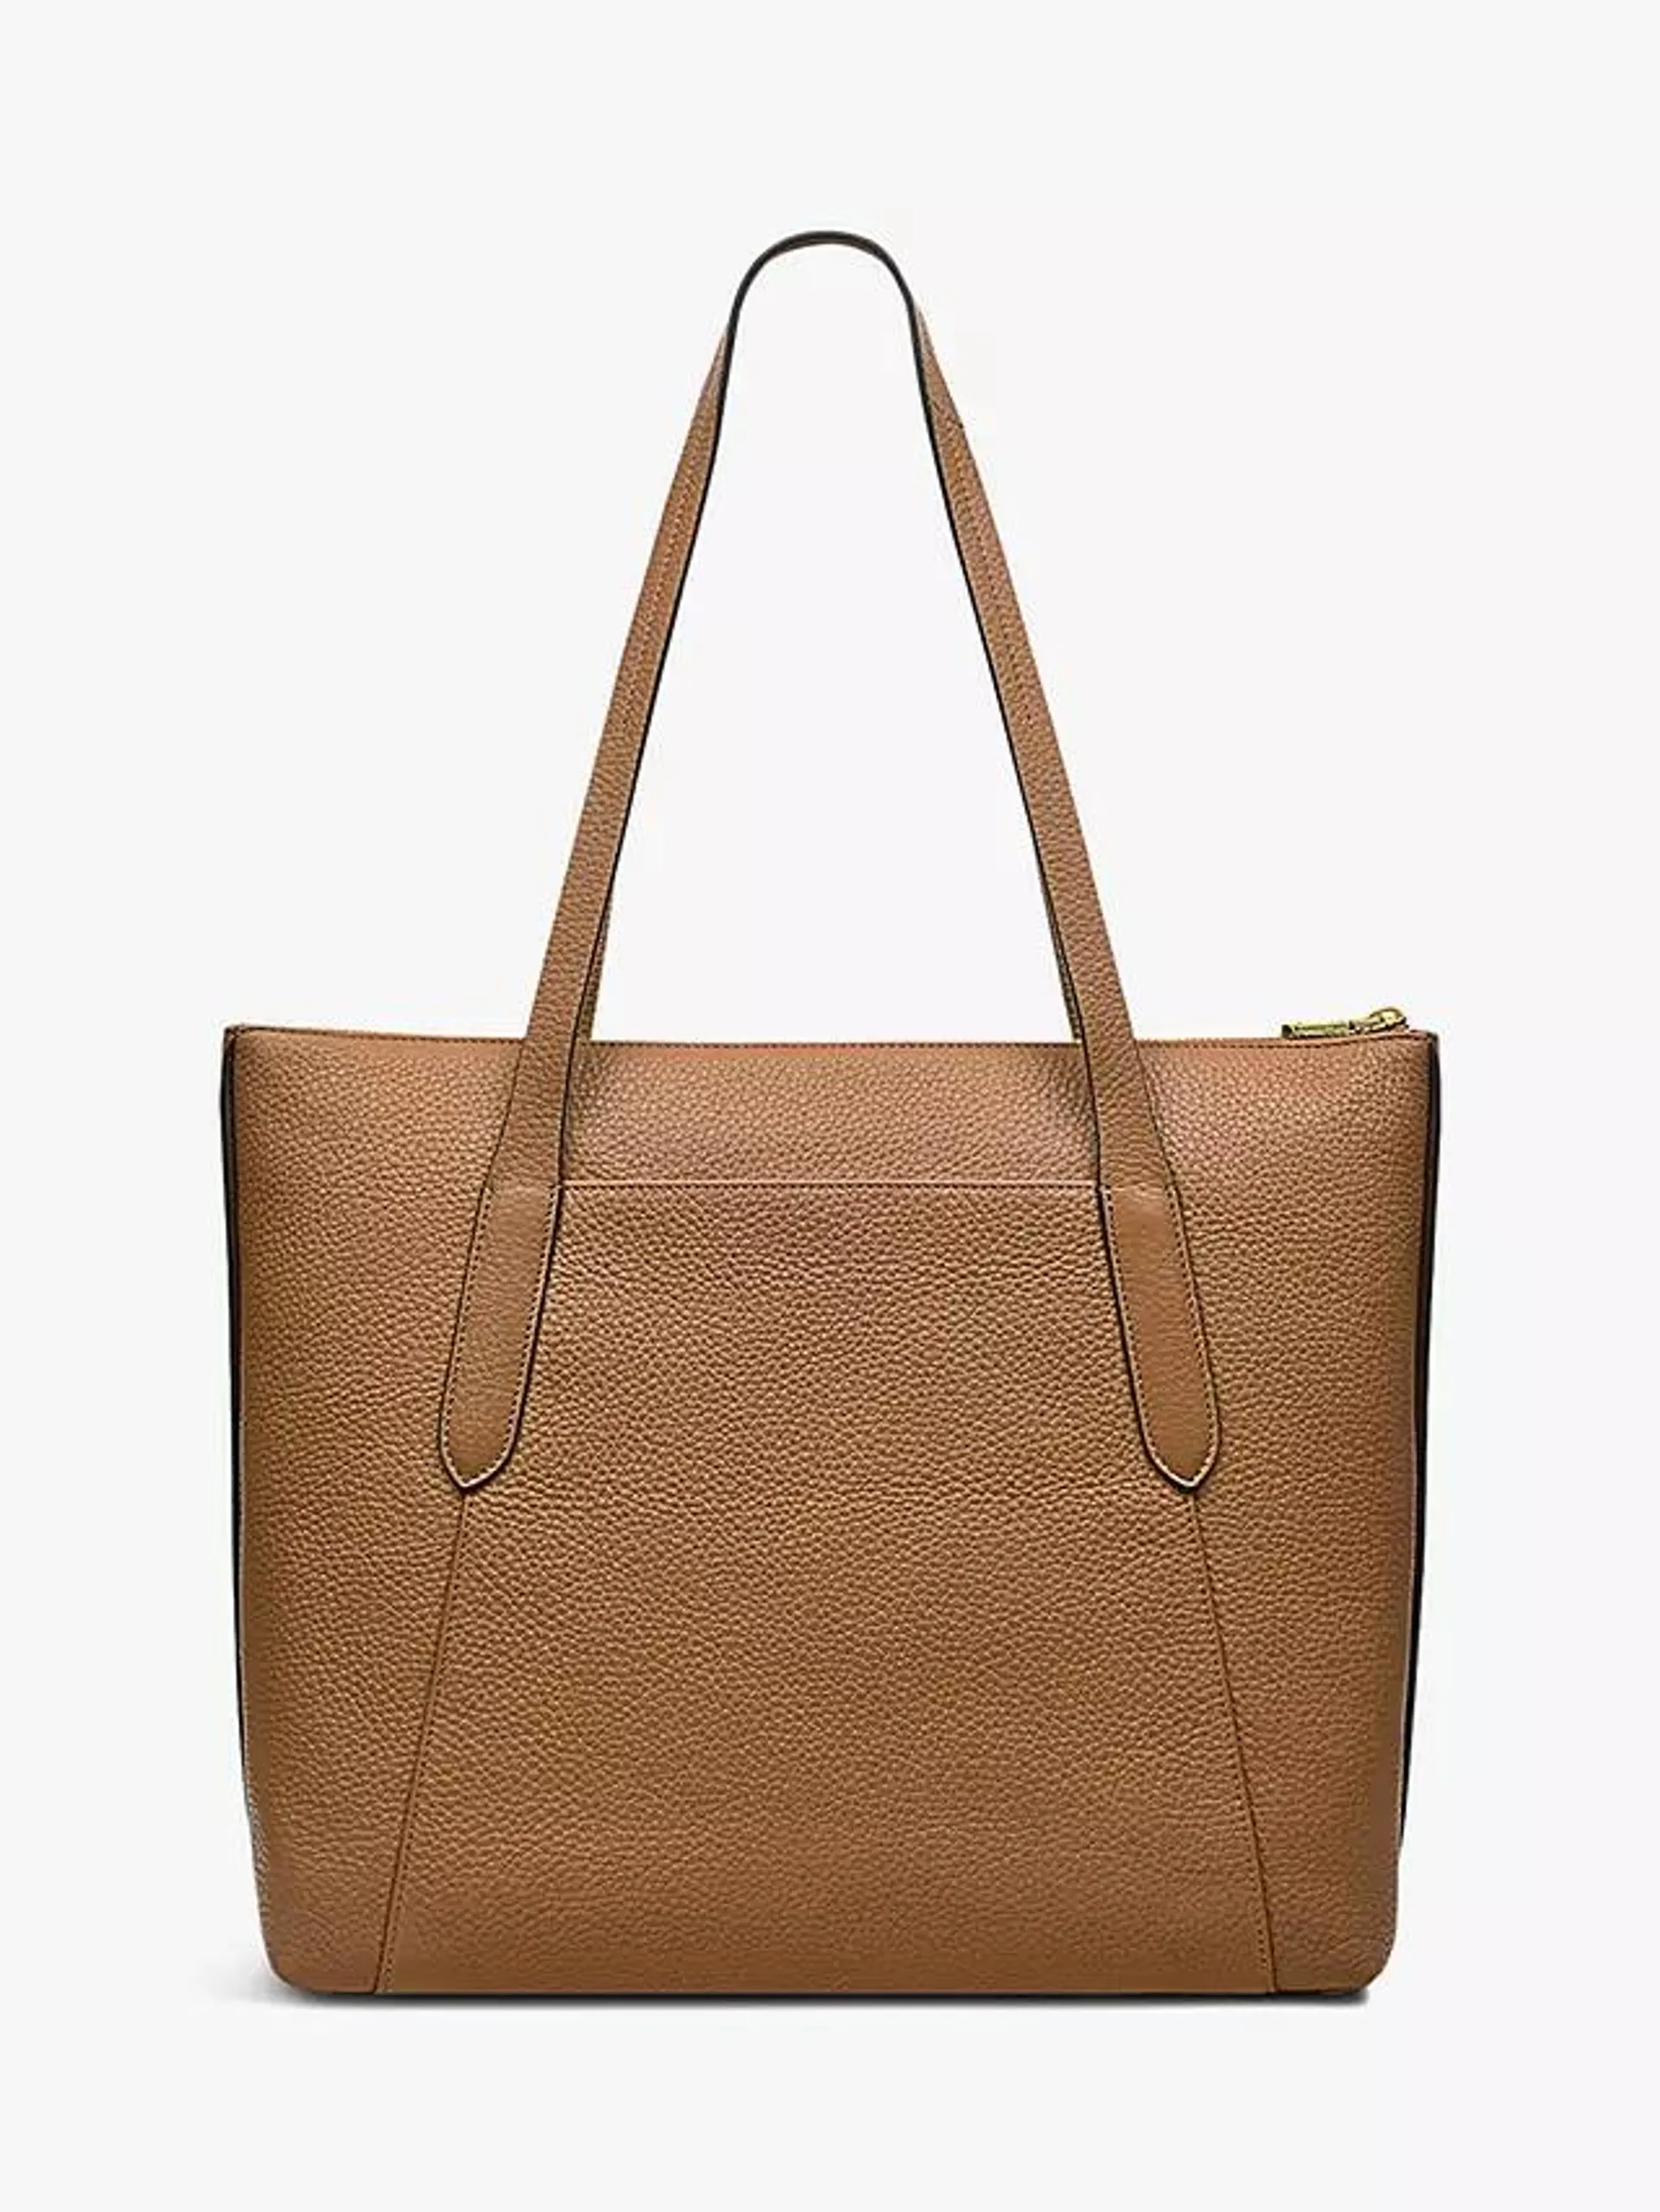 Radley Wood Street 2.0 Large Leather Zip Top Tote Bag, Butterscotch